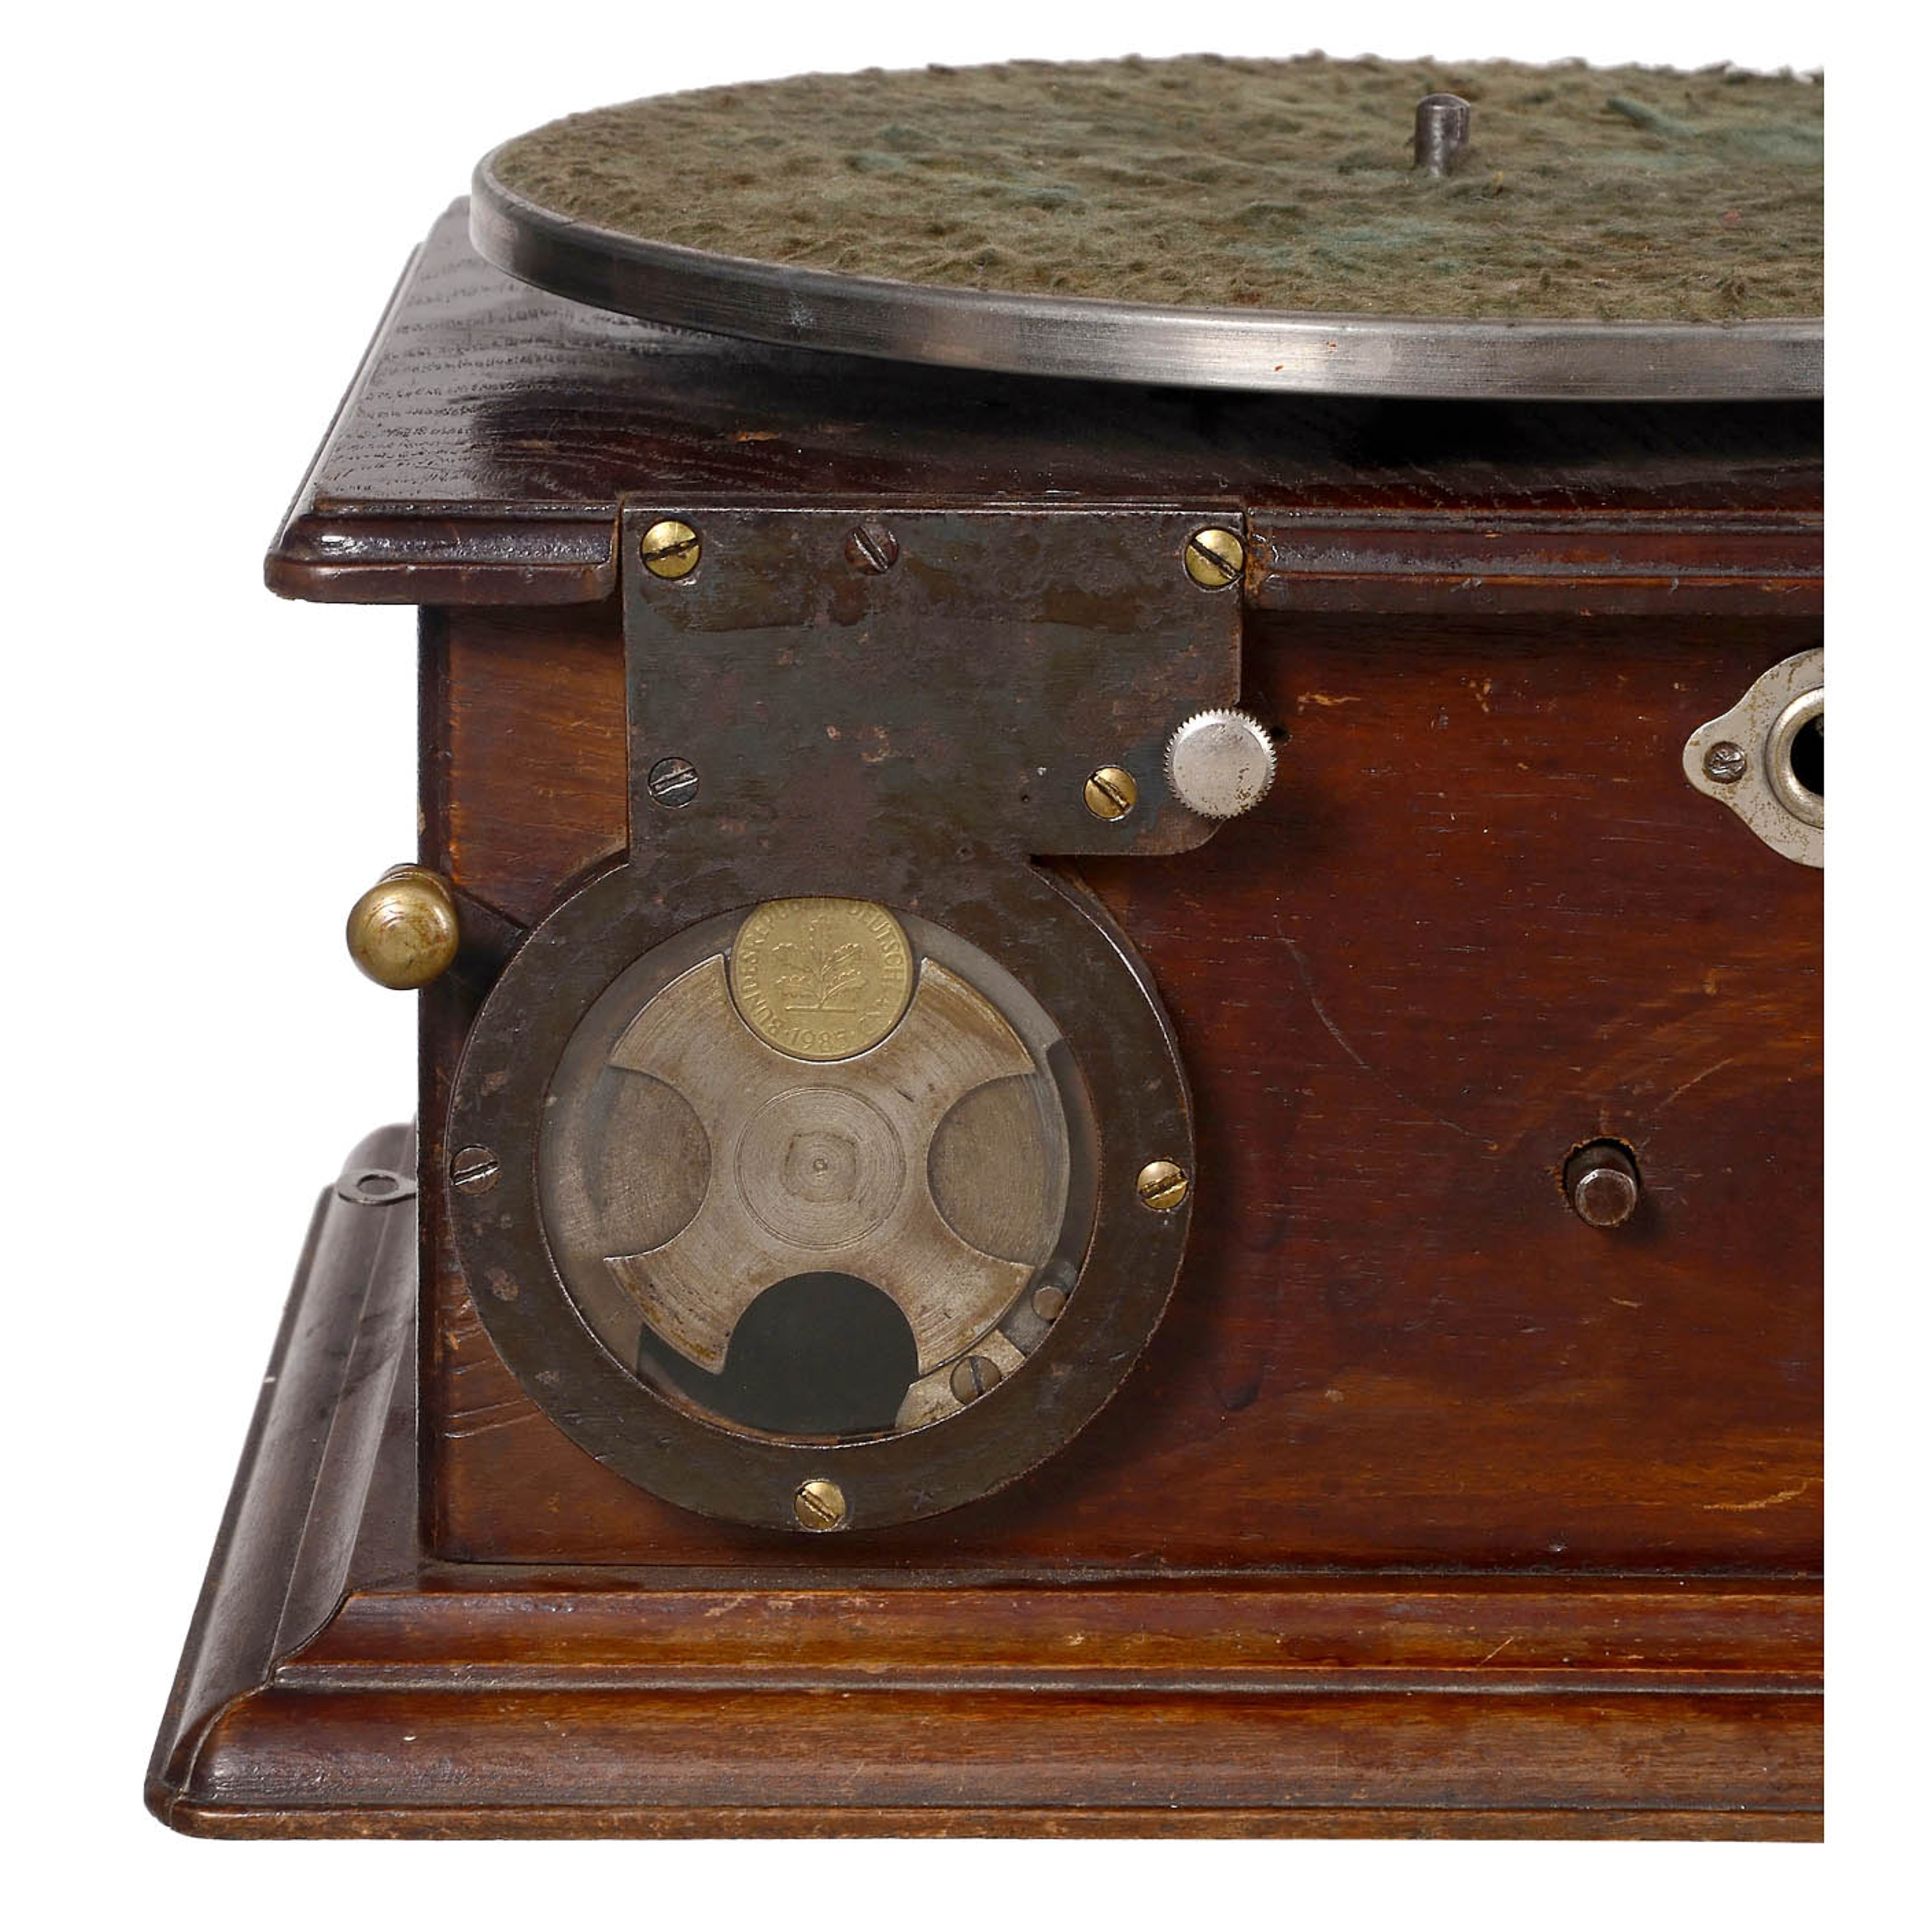 Parlophon Coin-Activated Horn Gramophone, c. 1910 - Image 2 of 2